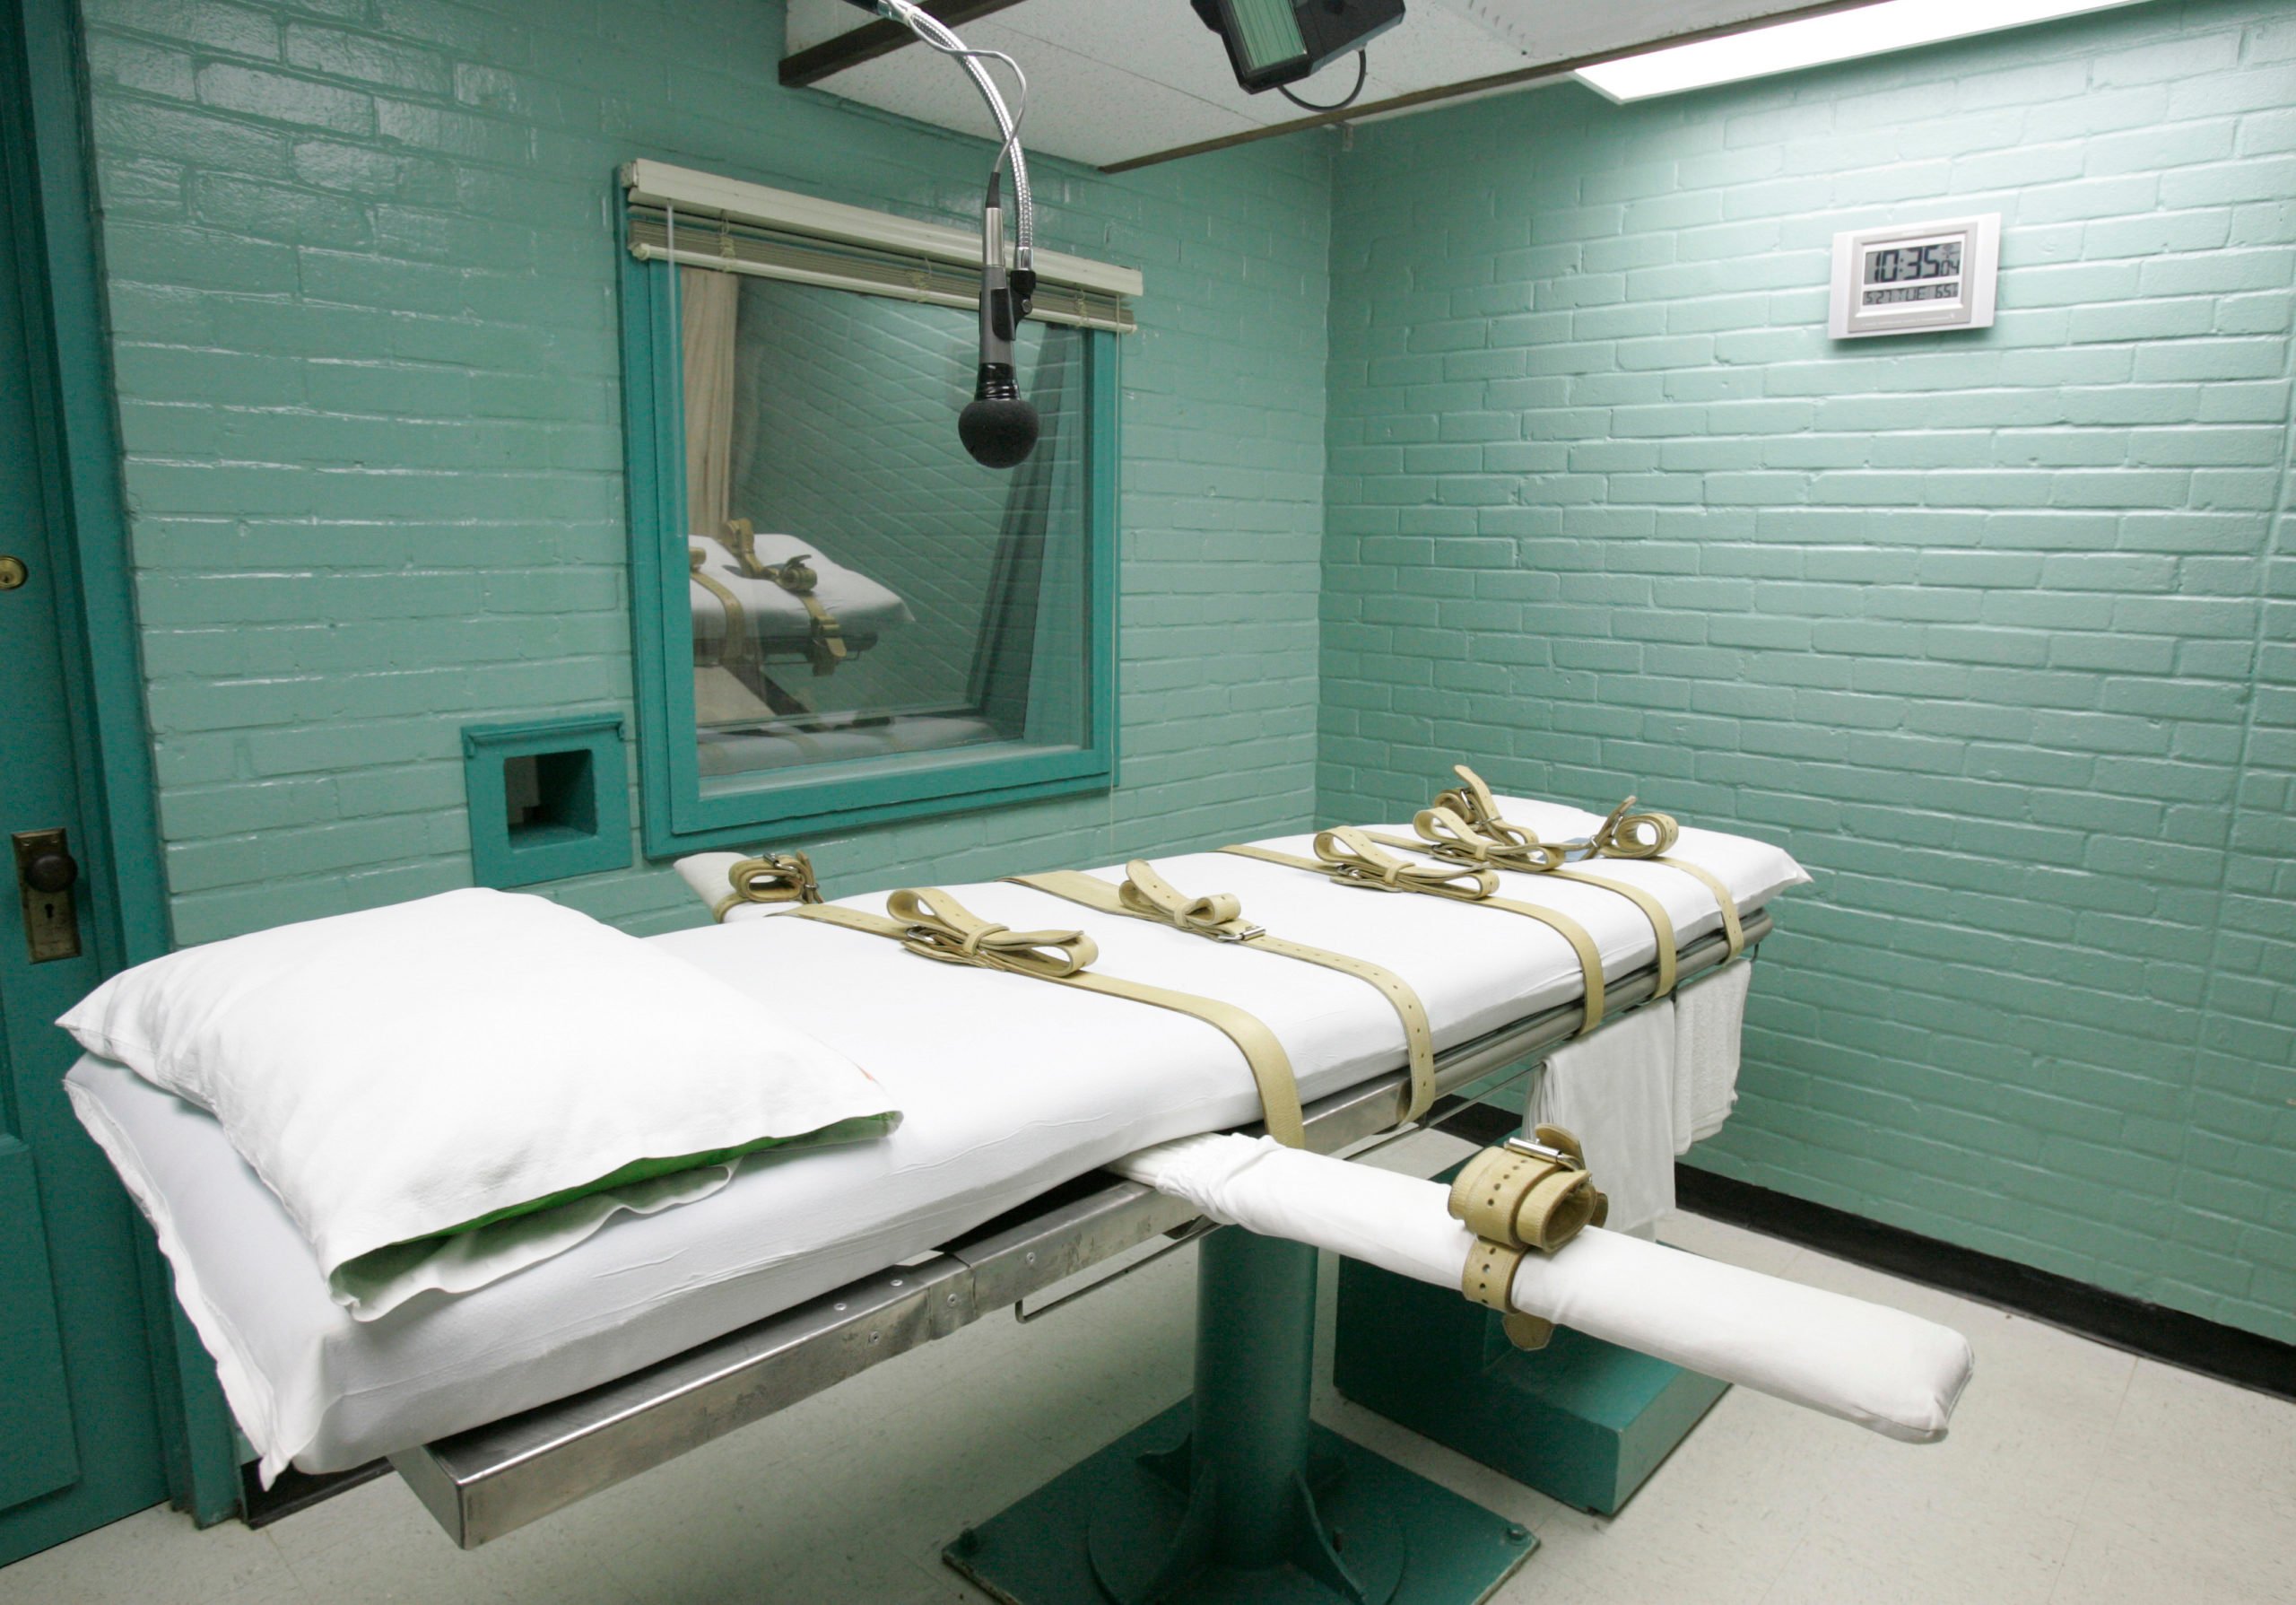 The state of Texas execution chamber in Huntsville